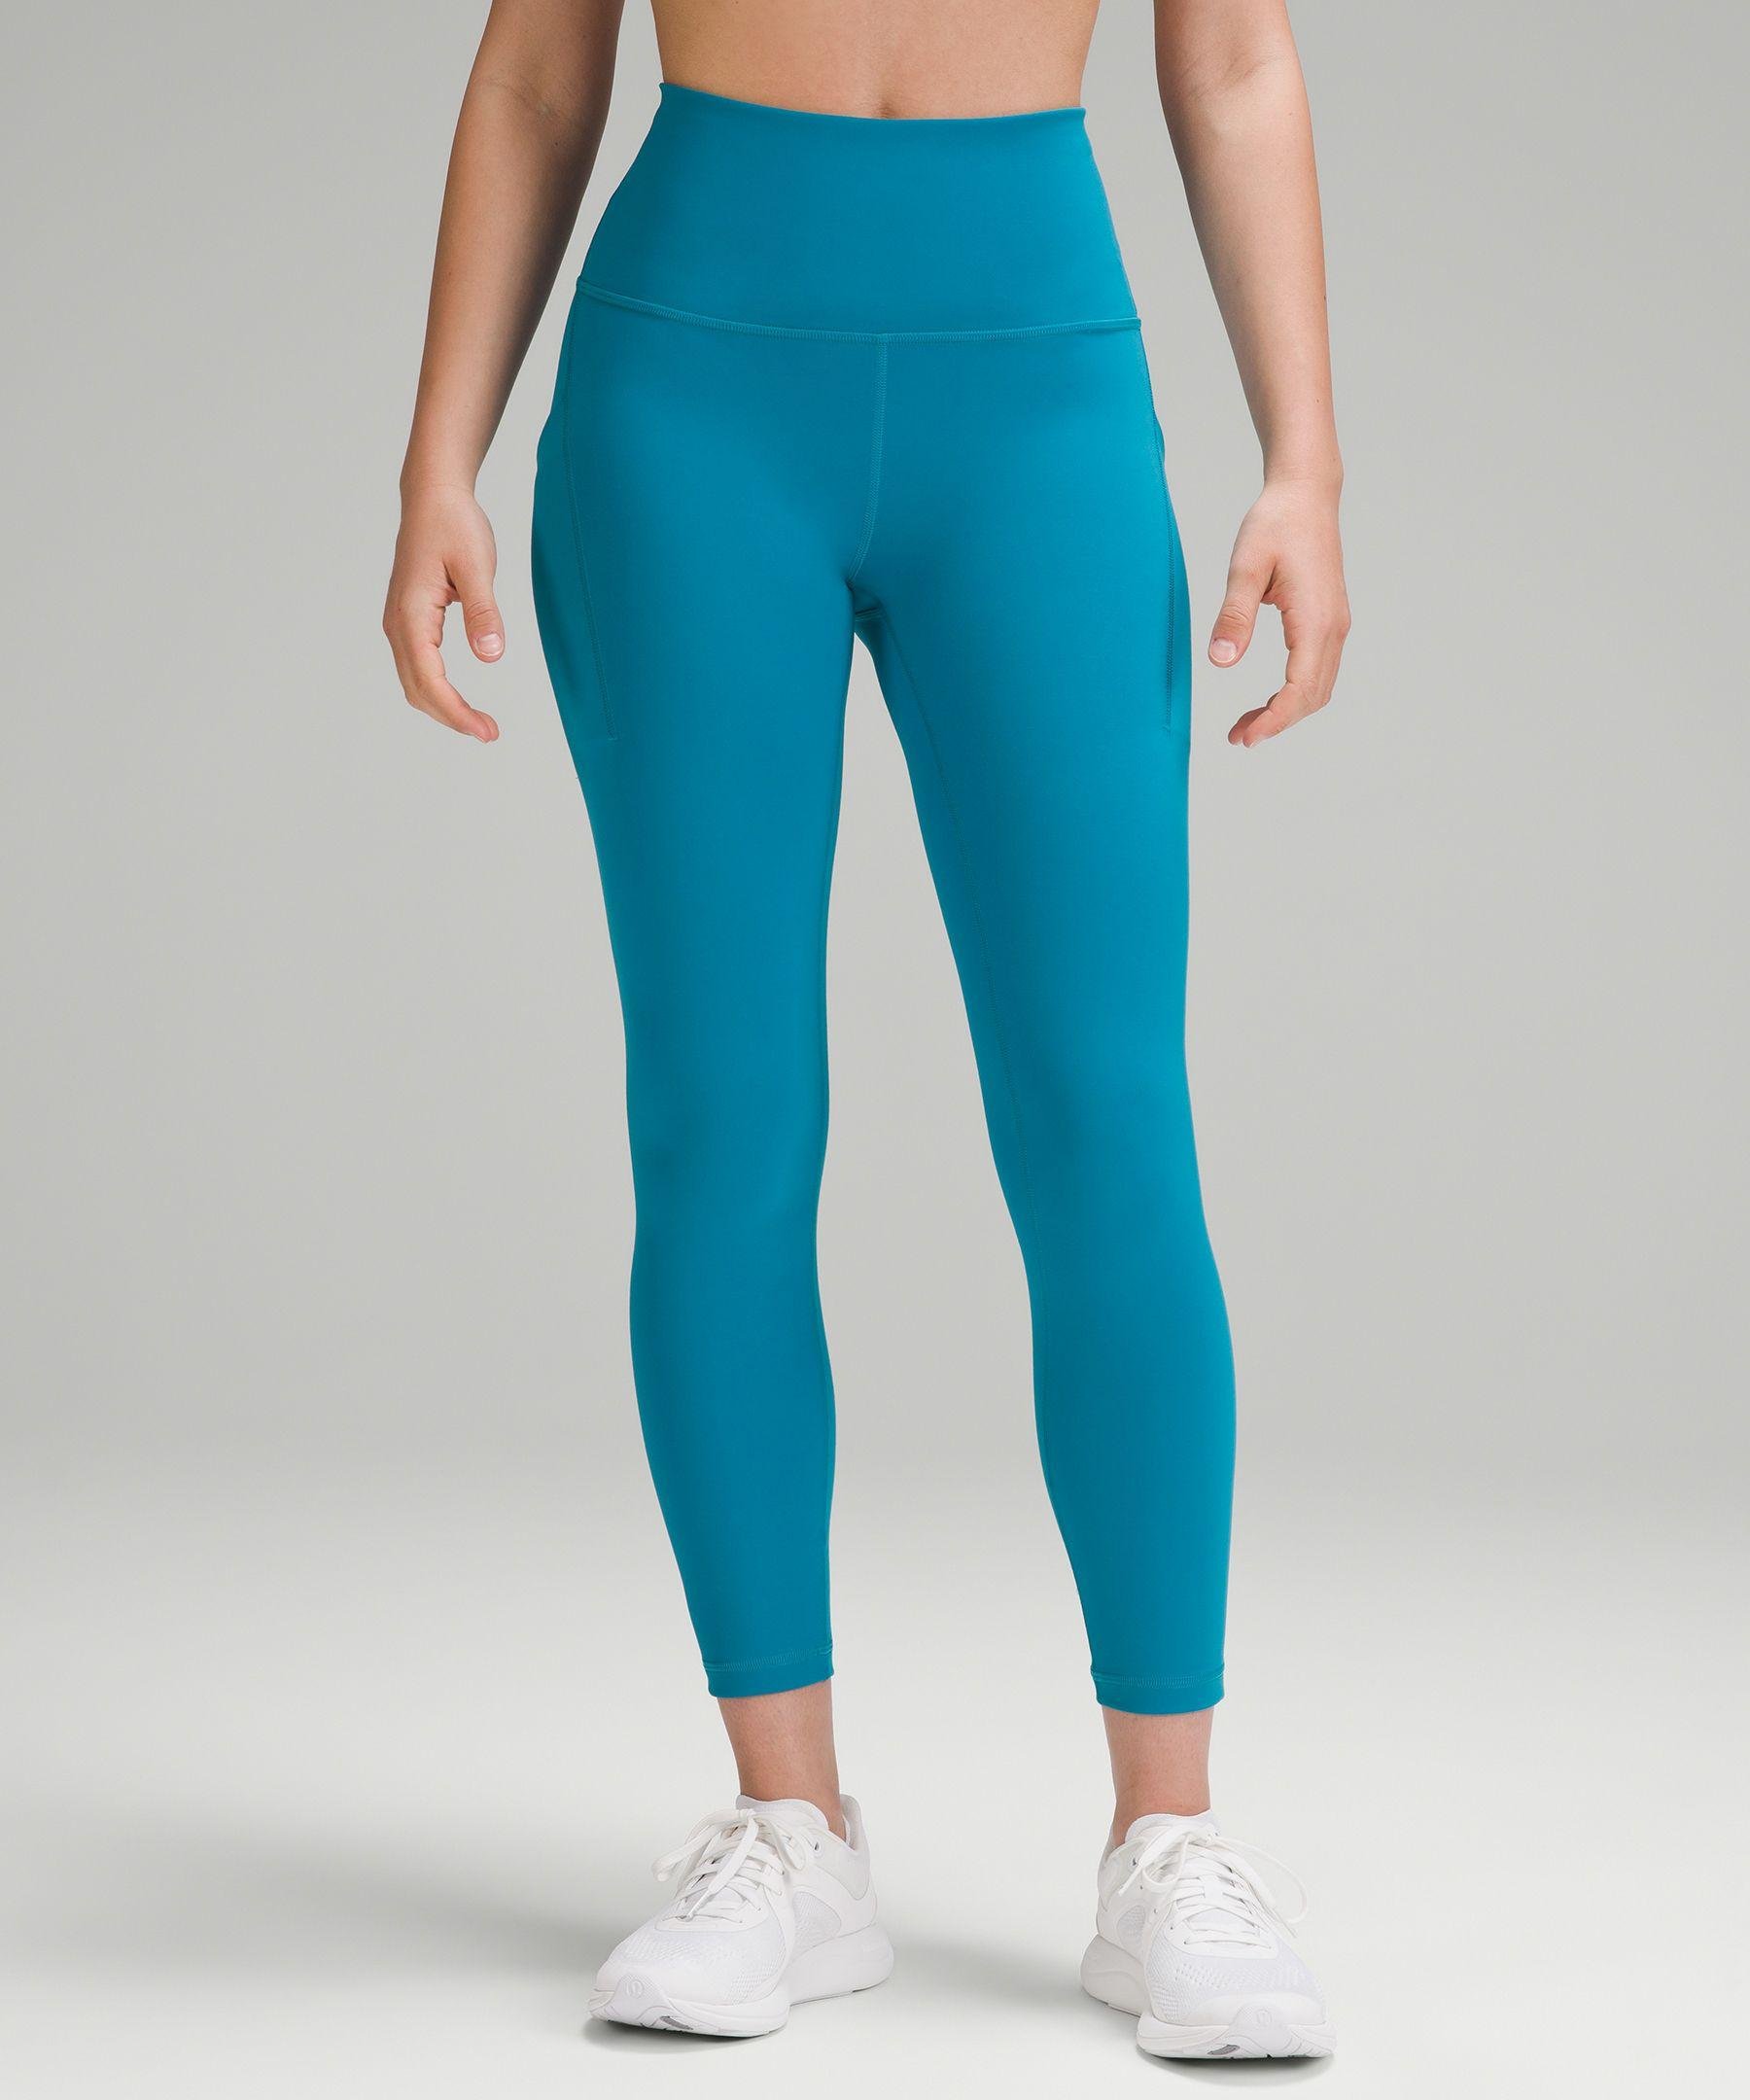 lululemon athletica Wunder Train High-rise Tight Leggings With Pockets -  25 - Color Blue - Size 0